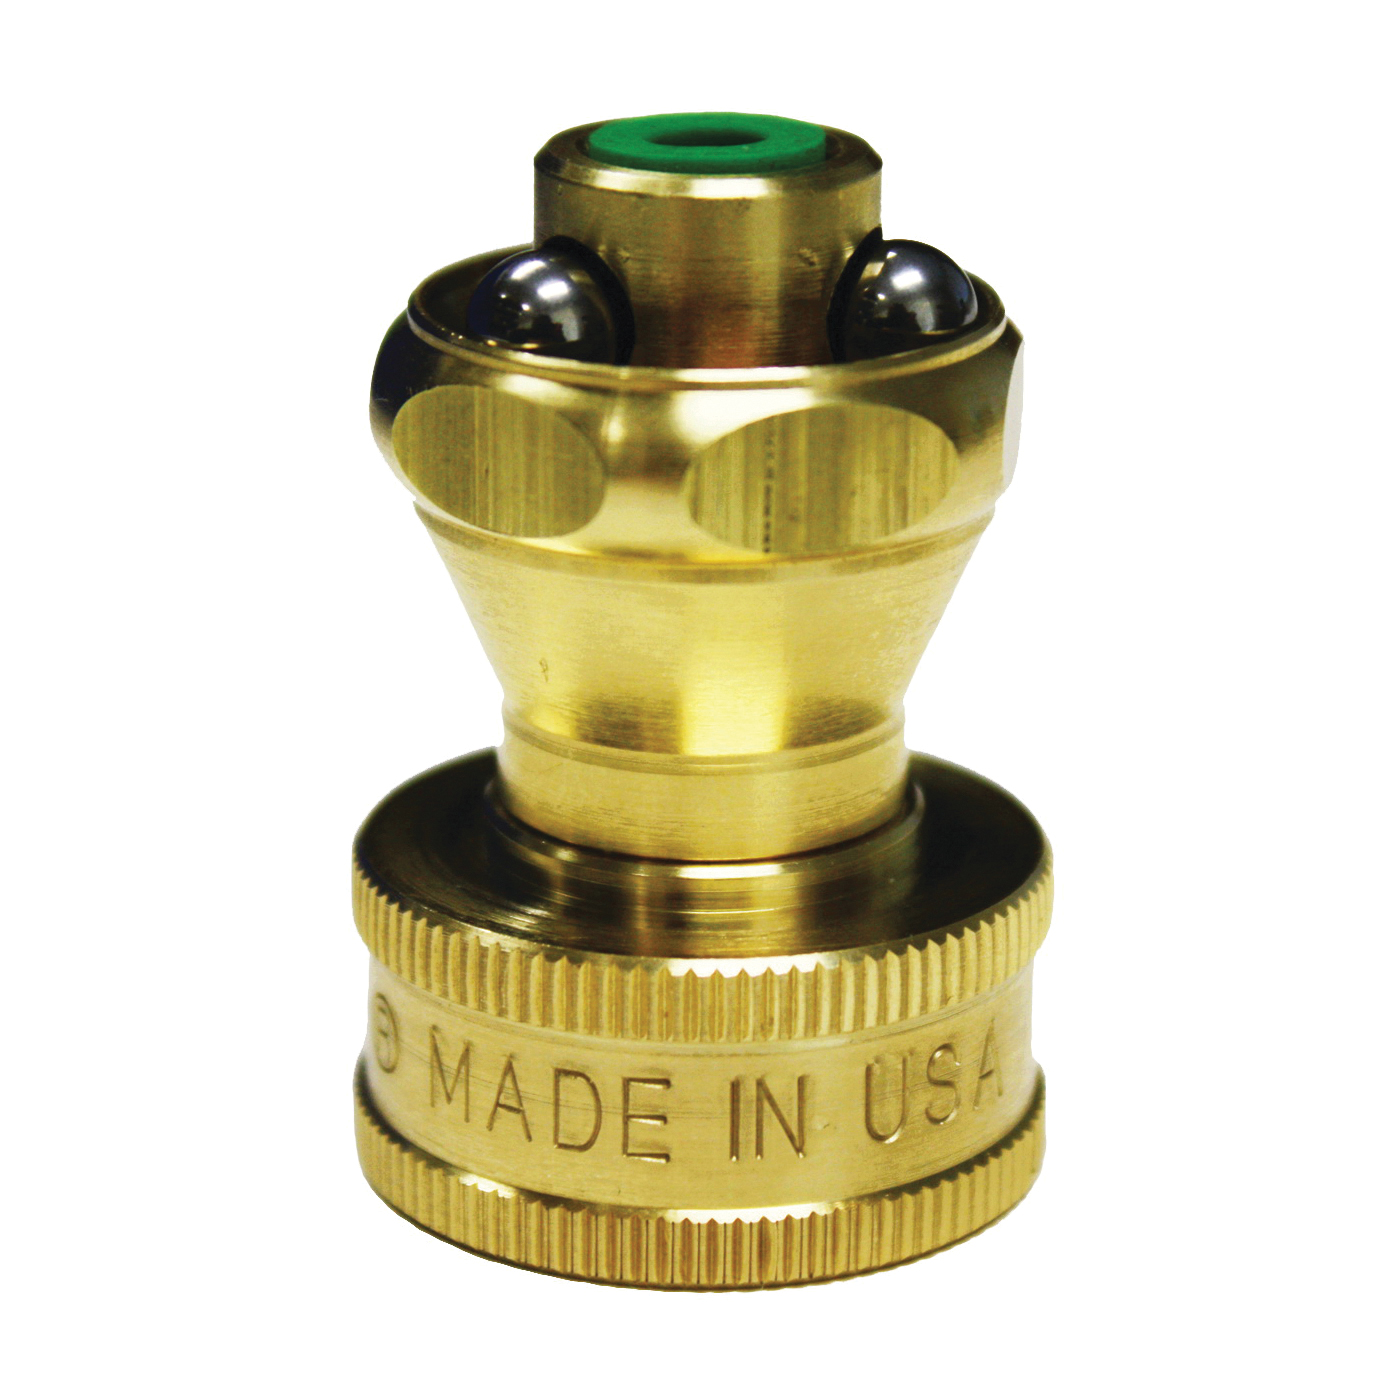 K-CO LBSR-120 Nozzle, Brass - 1